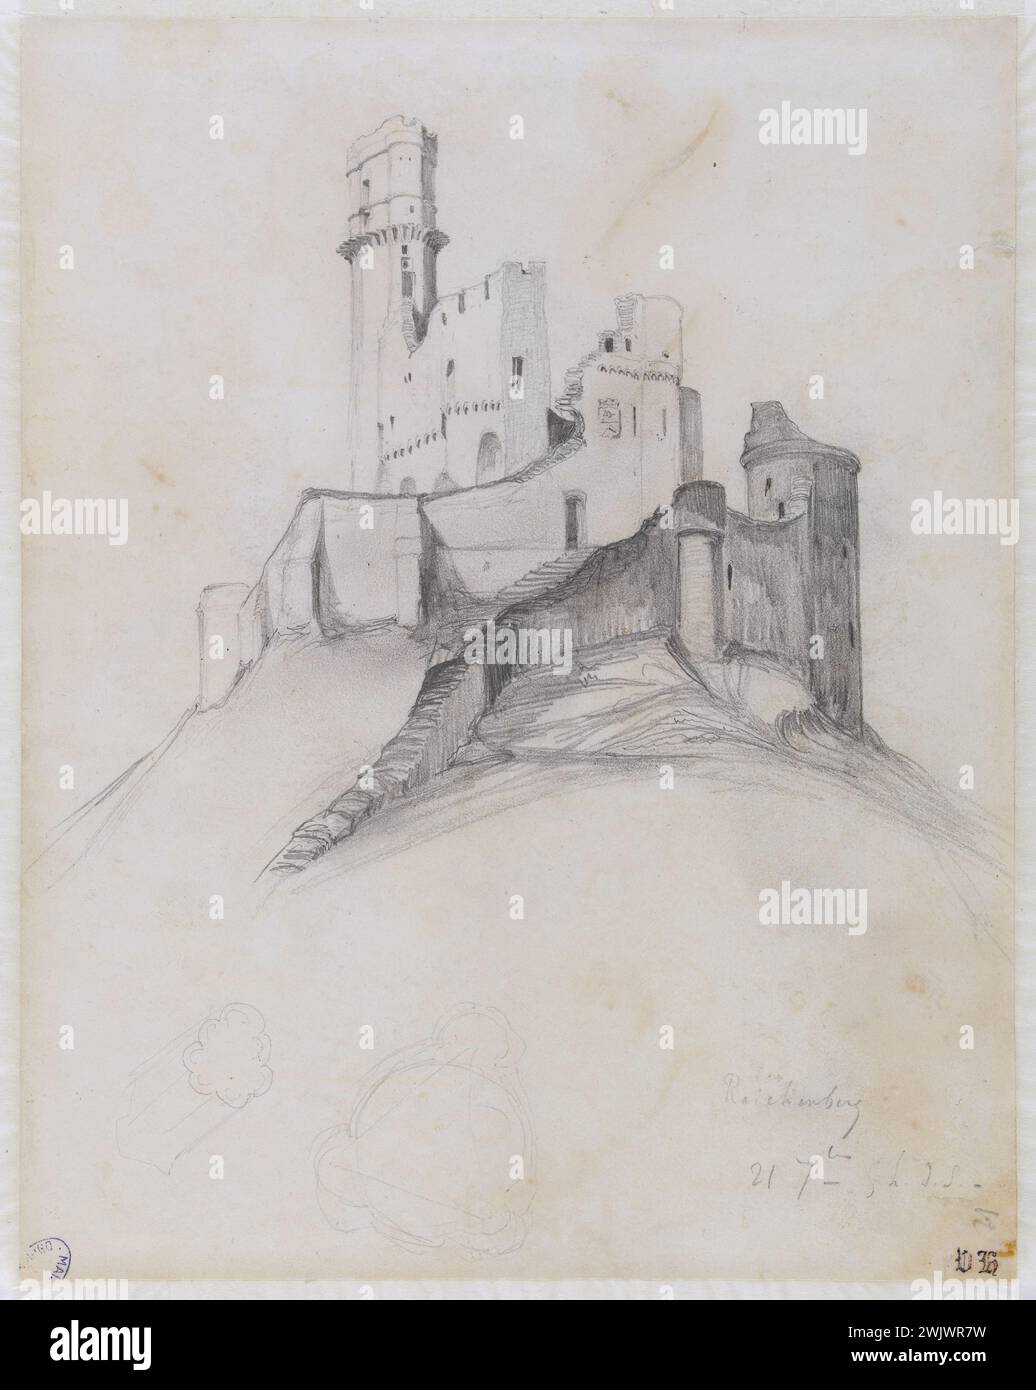 Victor Hugo (1802-1885). 'Reichenberg'. Graphite pencil on a leaf of vellum paper from an album. September 21, 1840. Paris, house of Victor Hugo. Architecture Medievale, album, chateau-combing, graphite pencil drawing, speaker, velin paper, reichenberg, tower, counterattheme, 19th 19th 19th 19th 19th 19 Stock Photo